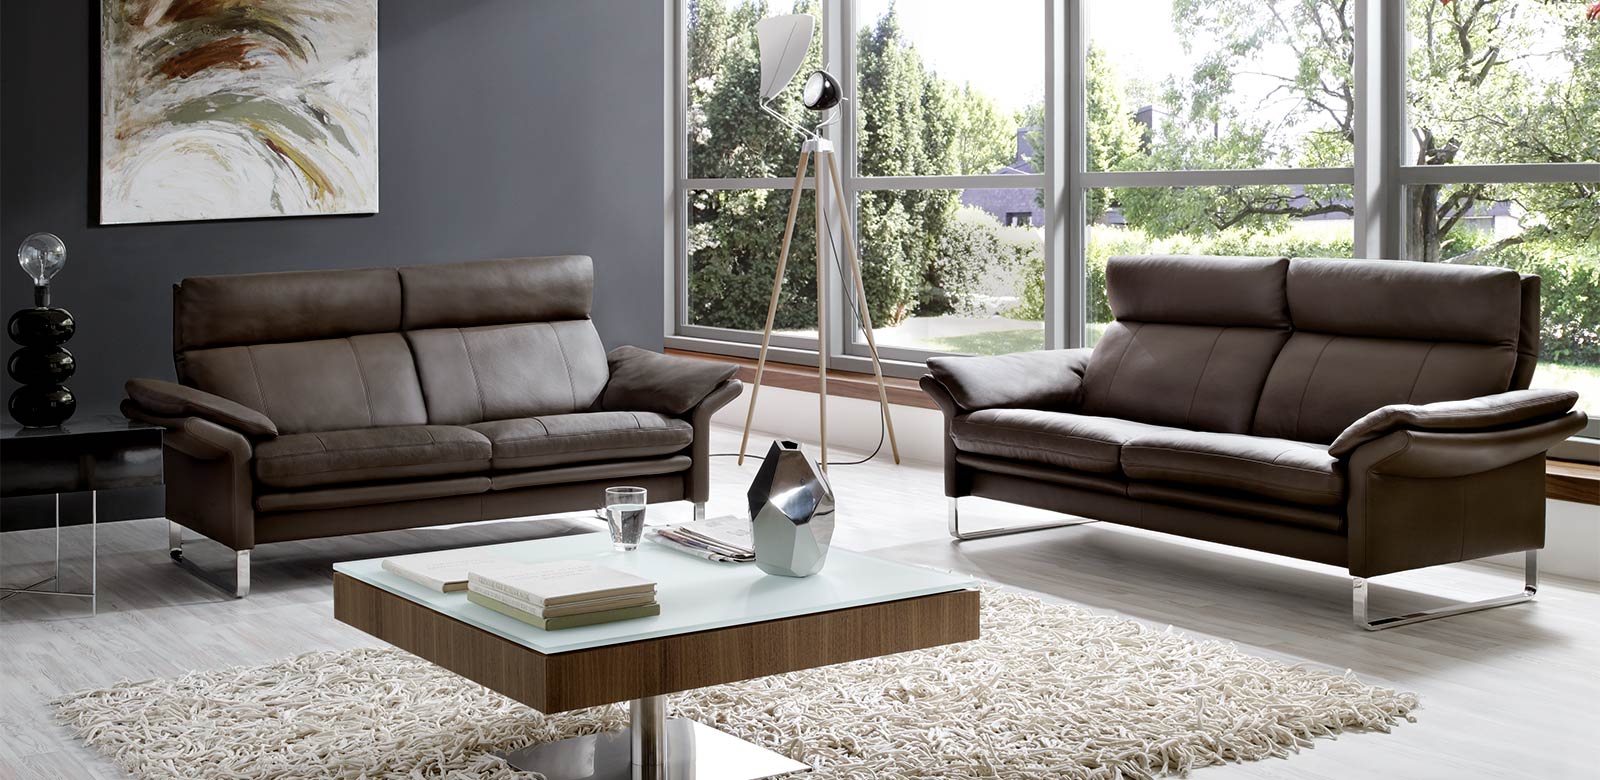 Lucca in grey-brown leather in the spacious living room with coffee table.